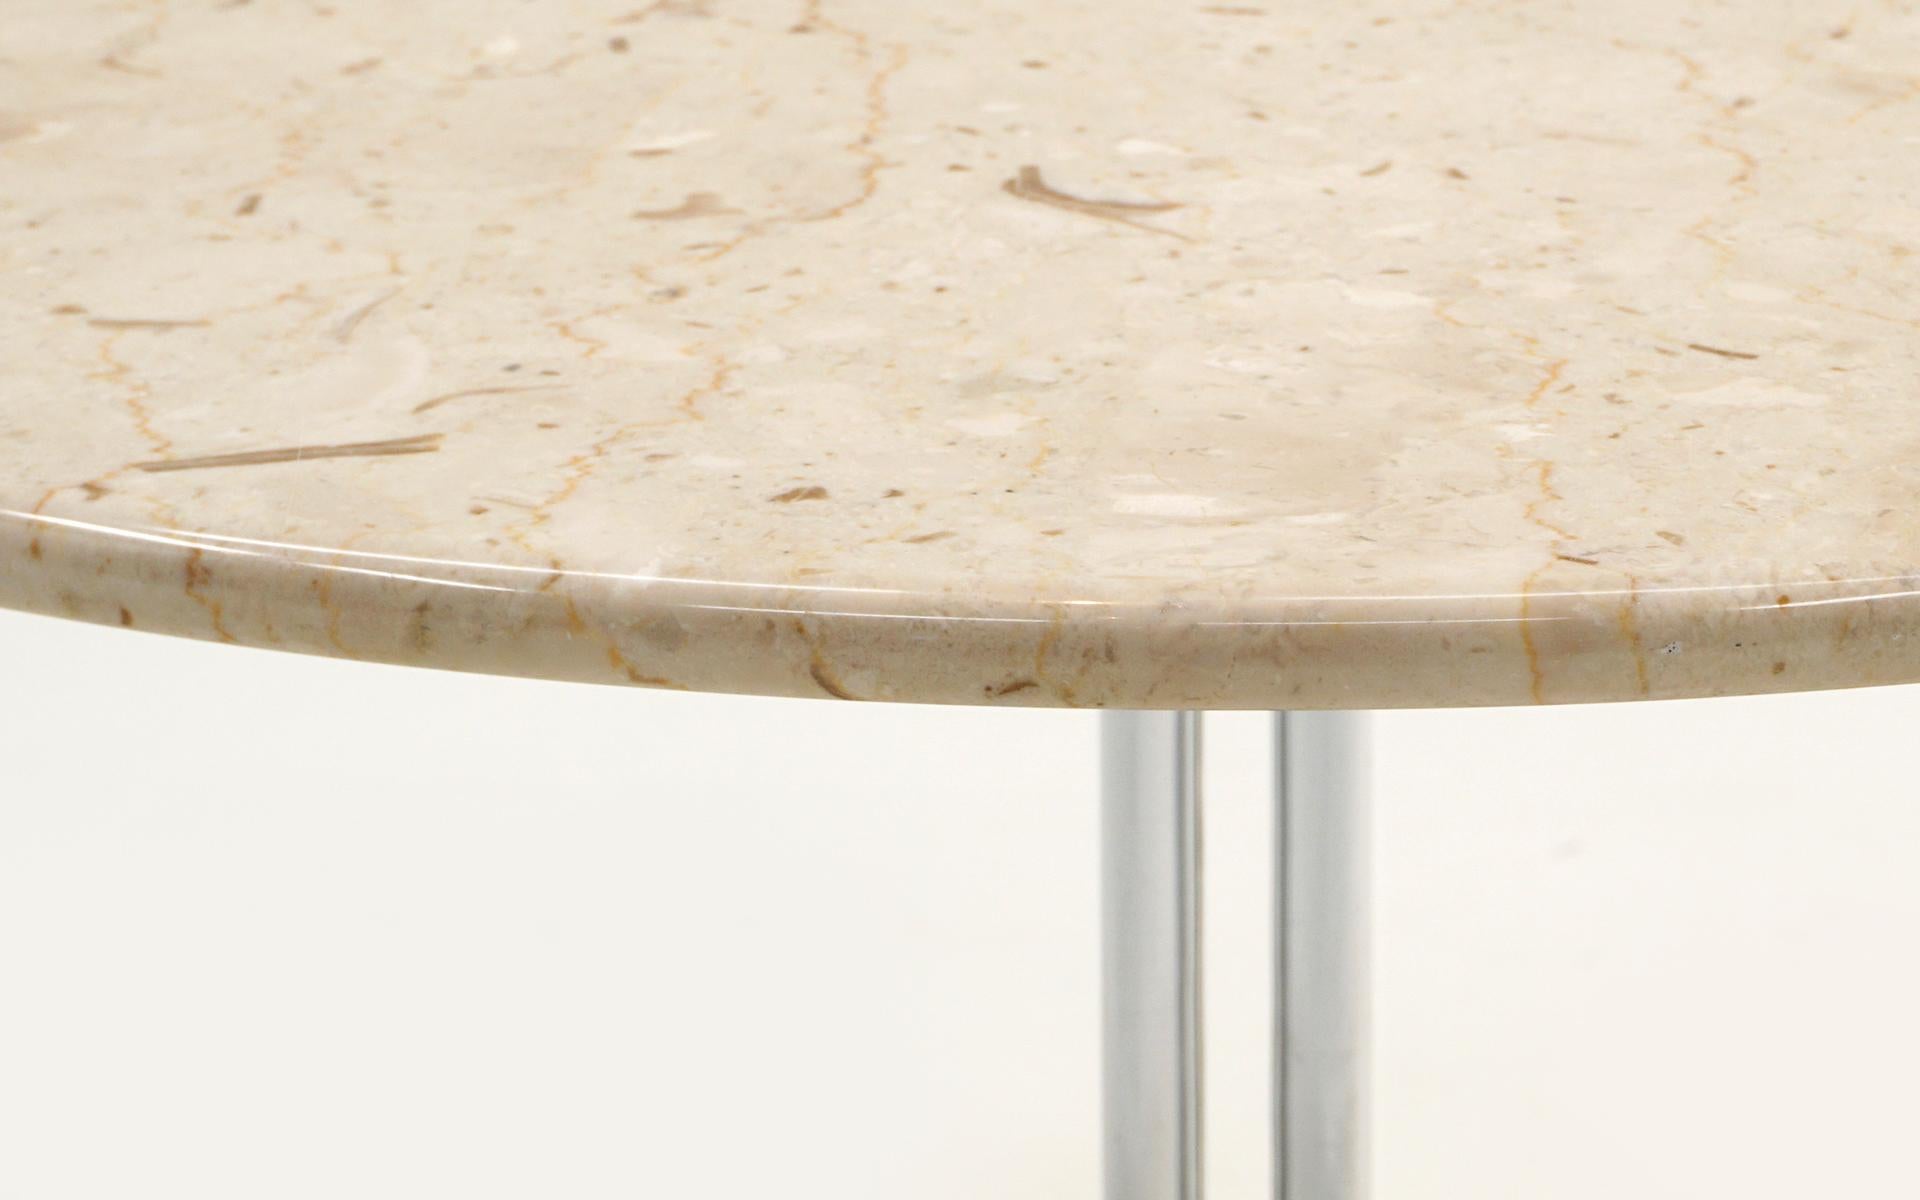 La Fonda Tables by Charles & Ray Eames, Travertine, Chrome, Signed In Good Condition For Sale In Kansas City, MO